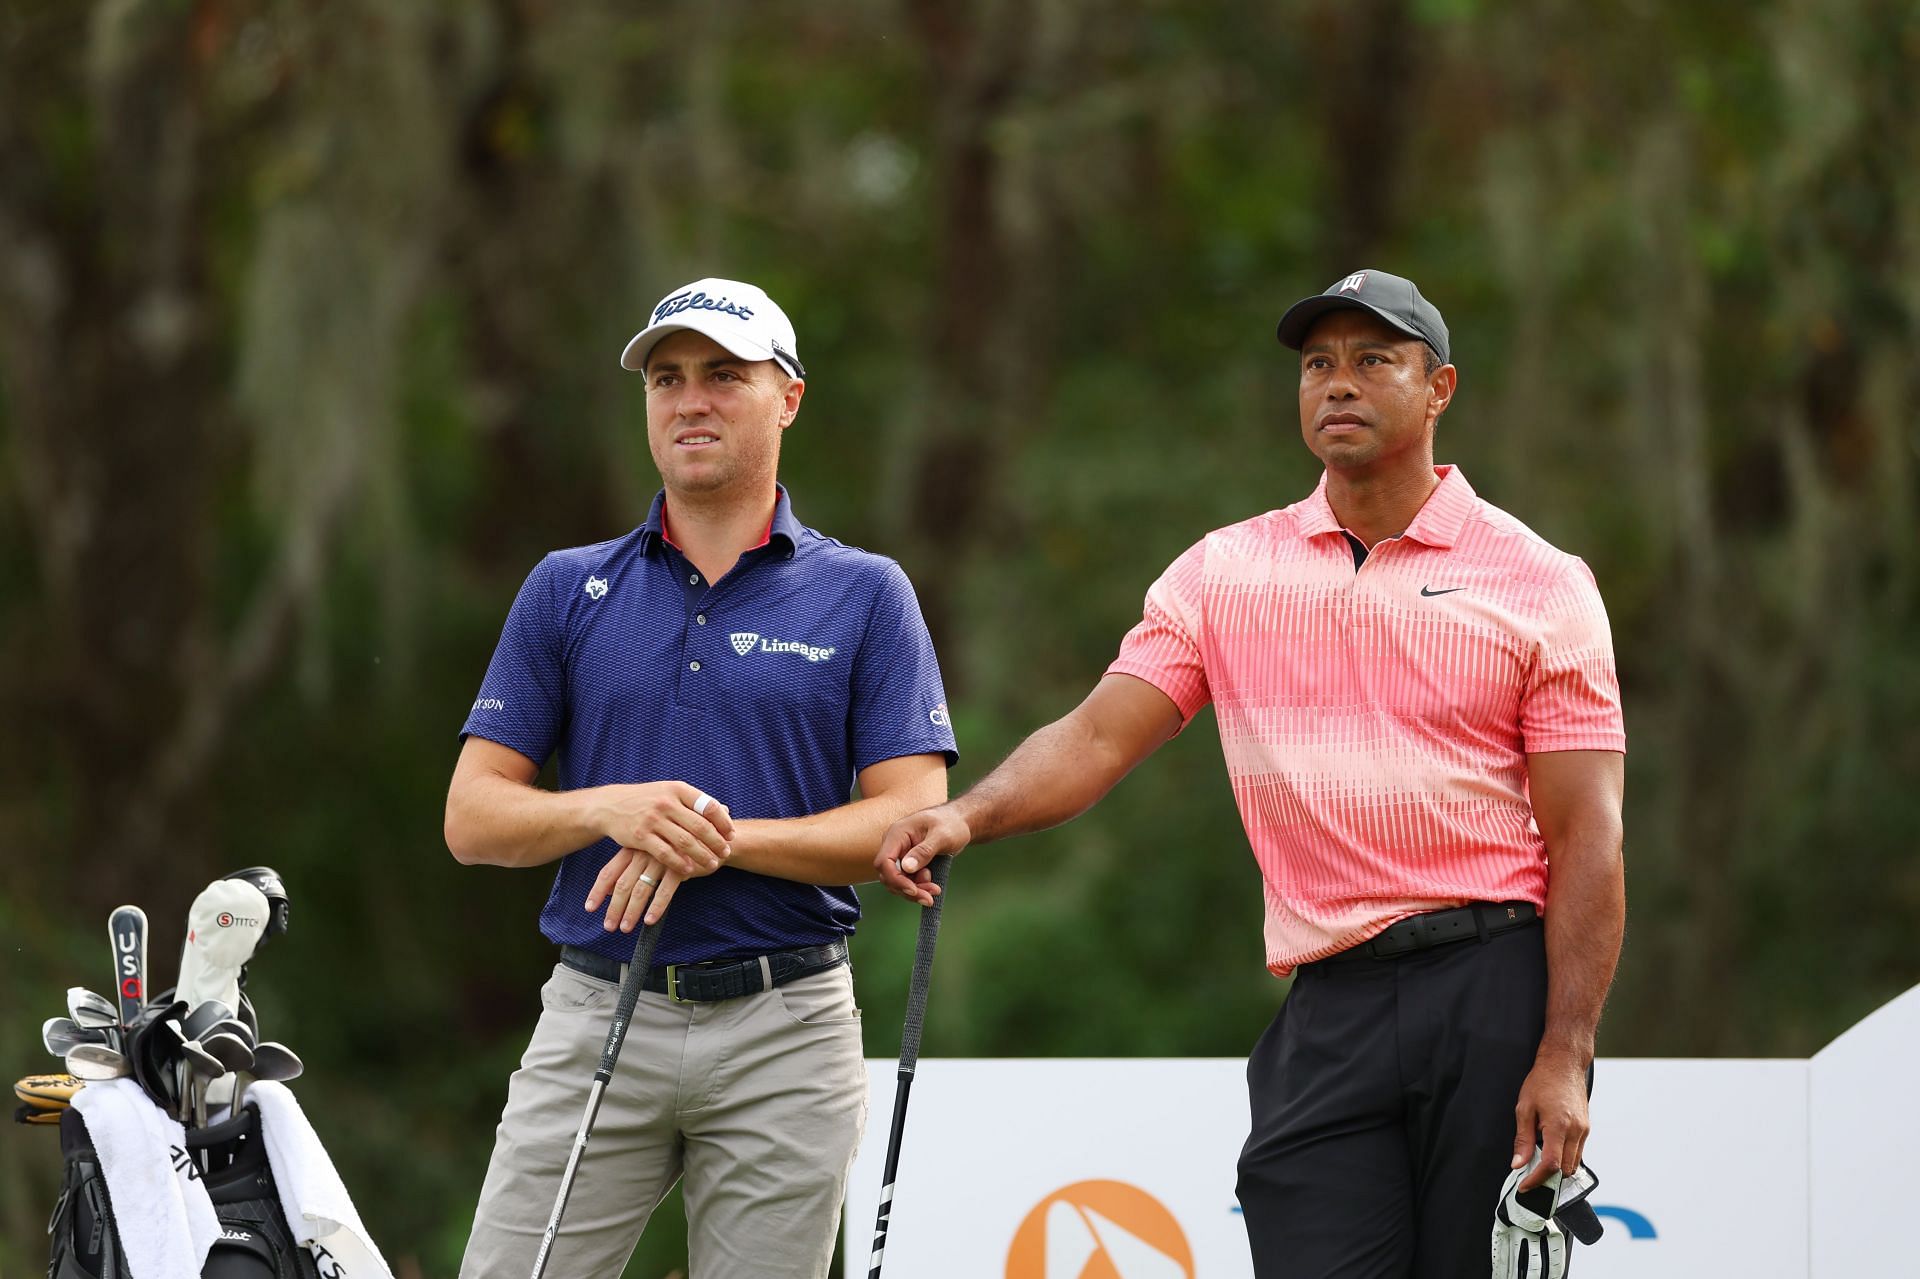 Justin Thomas and Tiger Woods at the PNC Championship - Round One (Image via Mike Ehrmann/Getty Images)